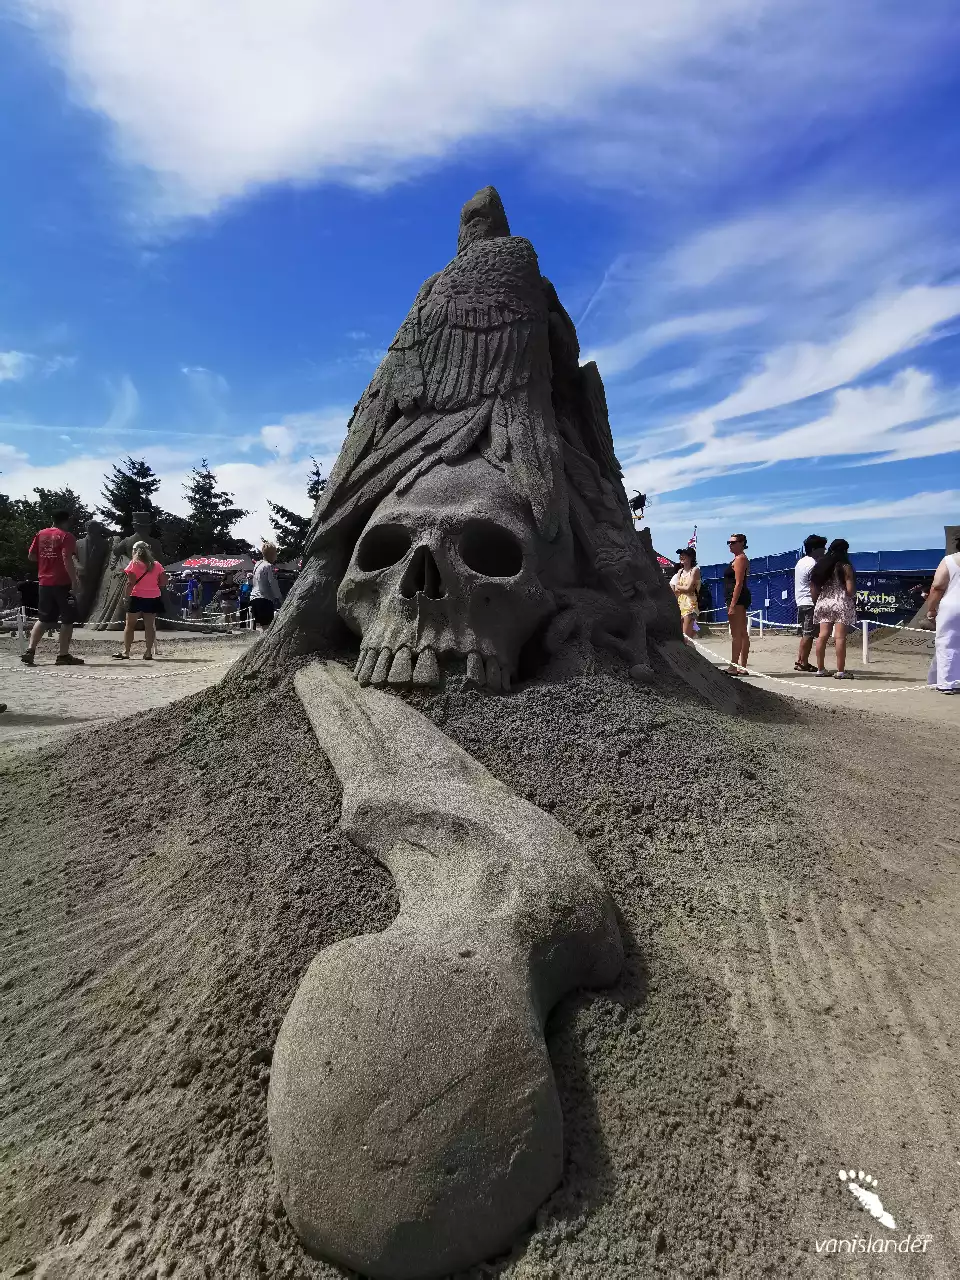 Sand Statue with a skull, Parksville Festival, Vancouver Island